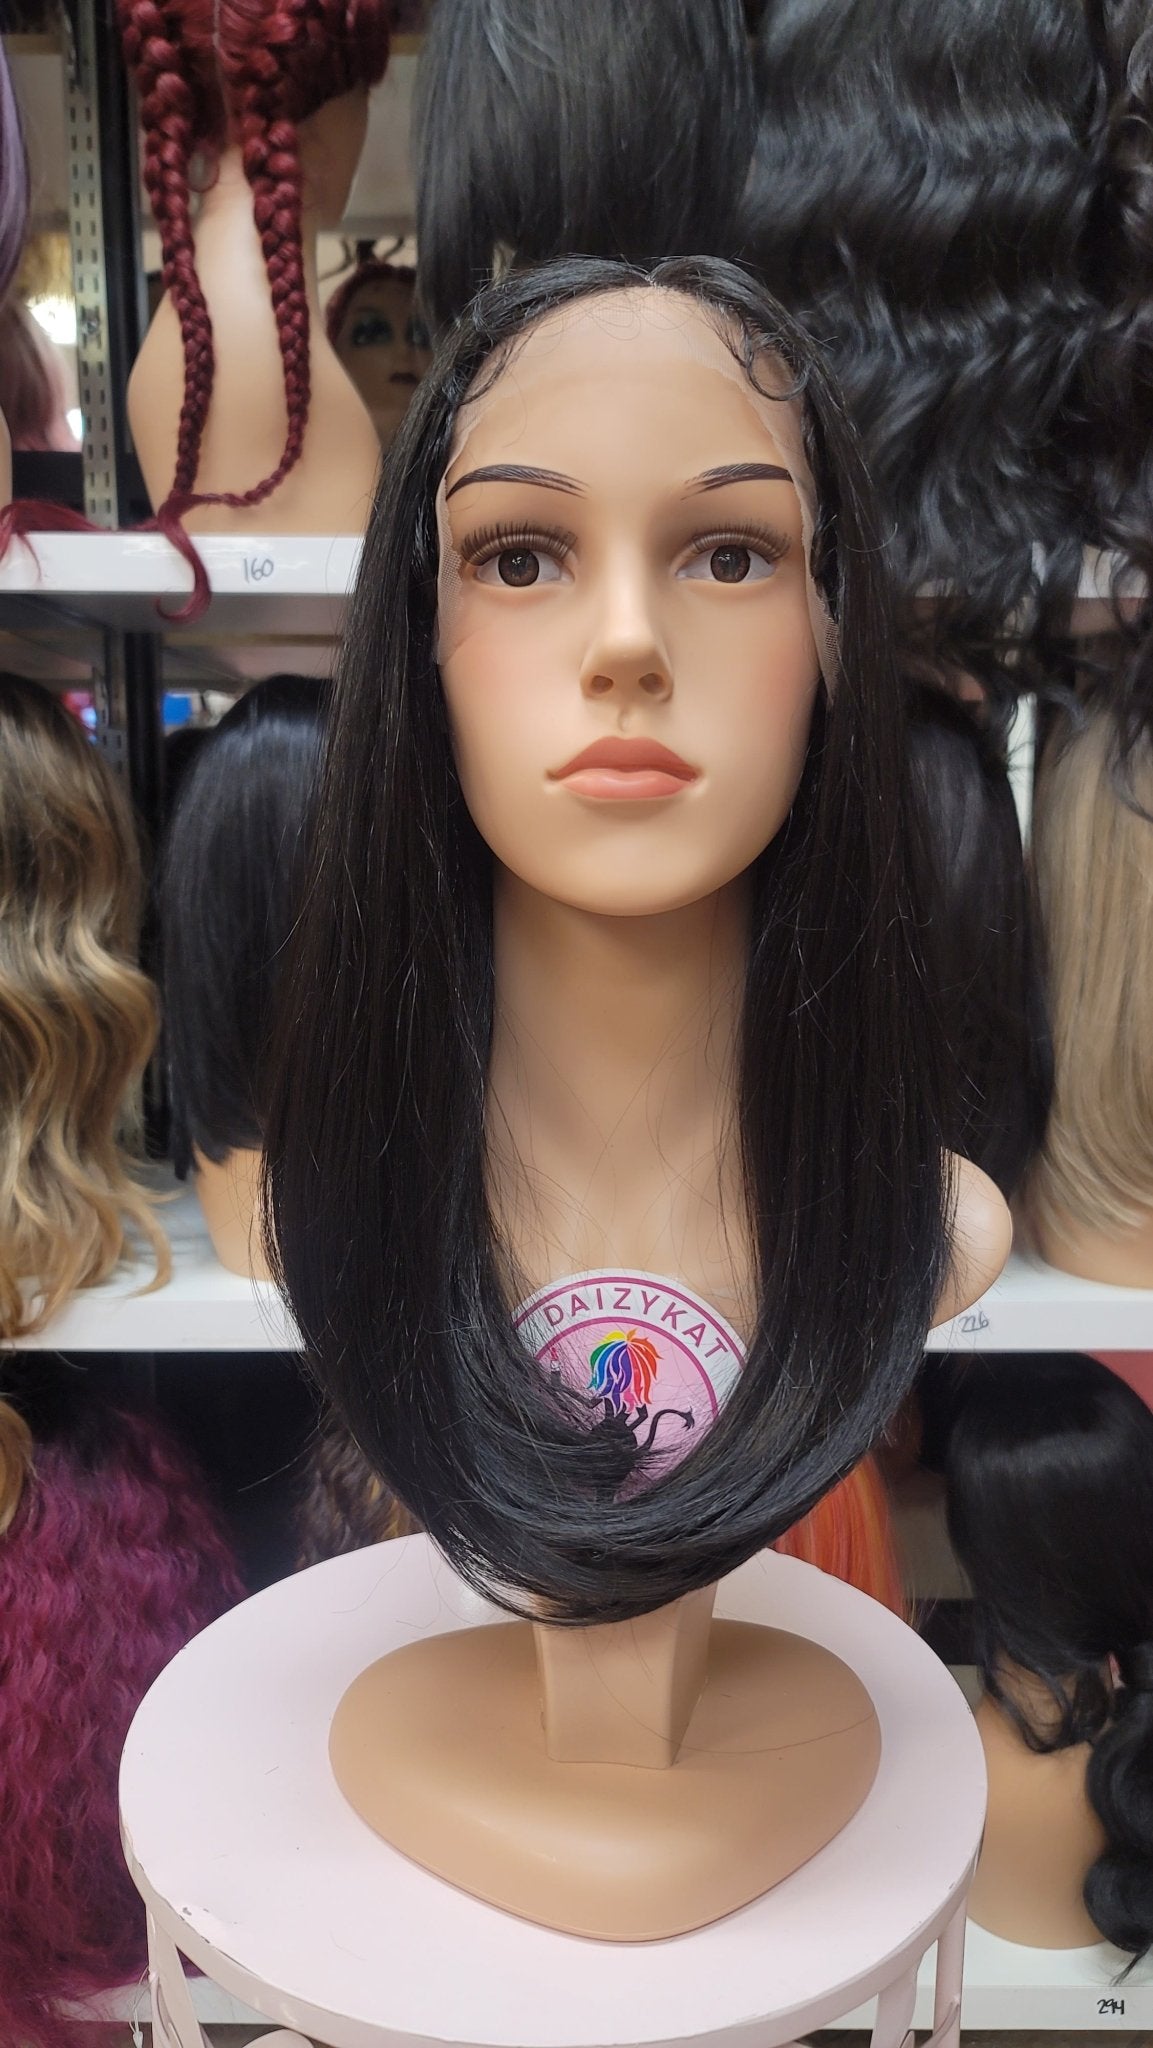 260 JANE - Middle Part Lace Front Wig - 1B - DaizyKat Cosmetics 260 JANE - Middle Part Lace Front Wig - 1B DaizyKat Cosmetics Wigs